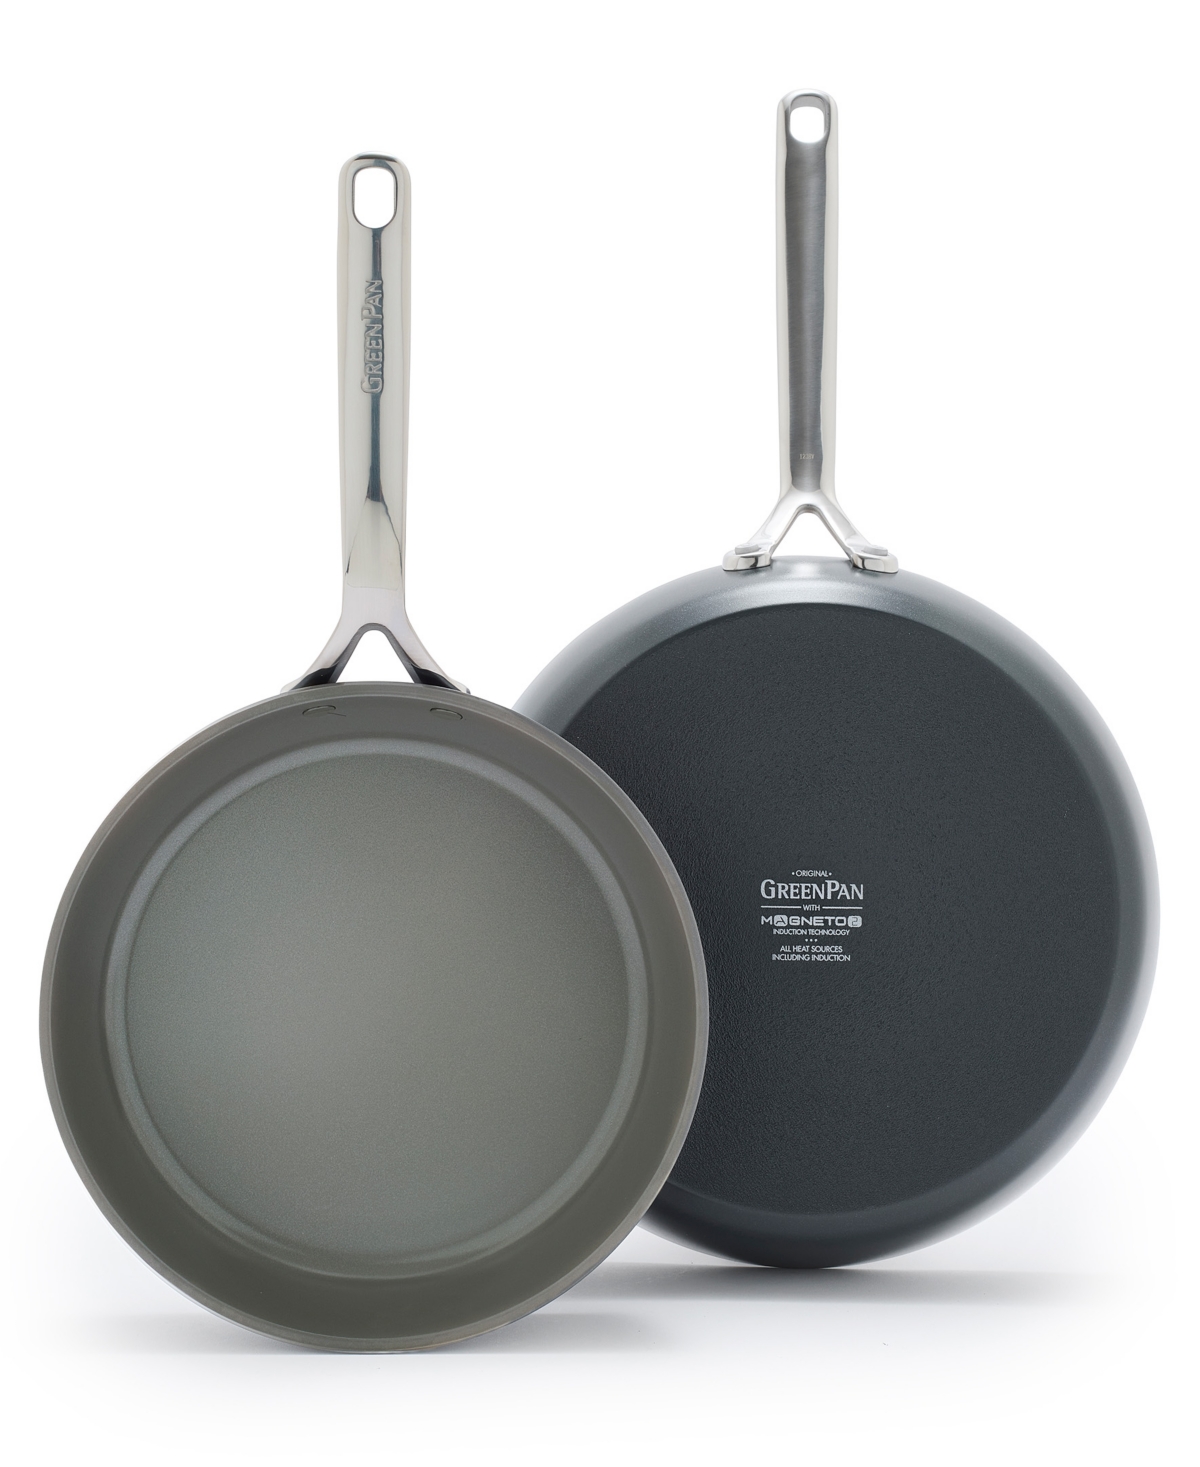 Greenpan Gp5 Hard Anodized Healthy Ceramic Nonstick 2-piece Fry Pan Set, 9.5" And 11" In Slate